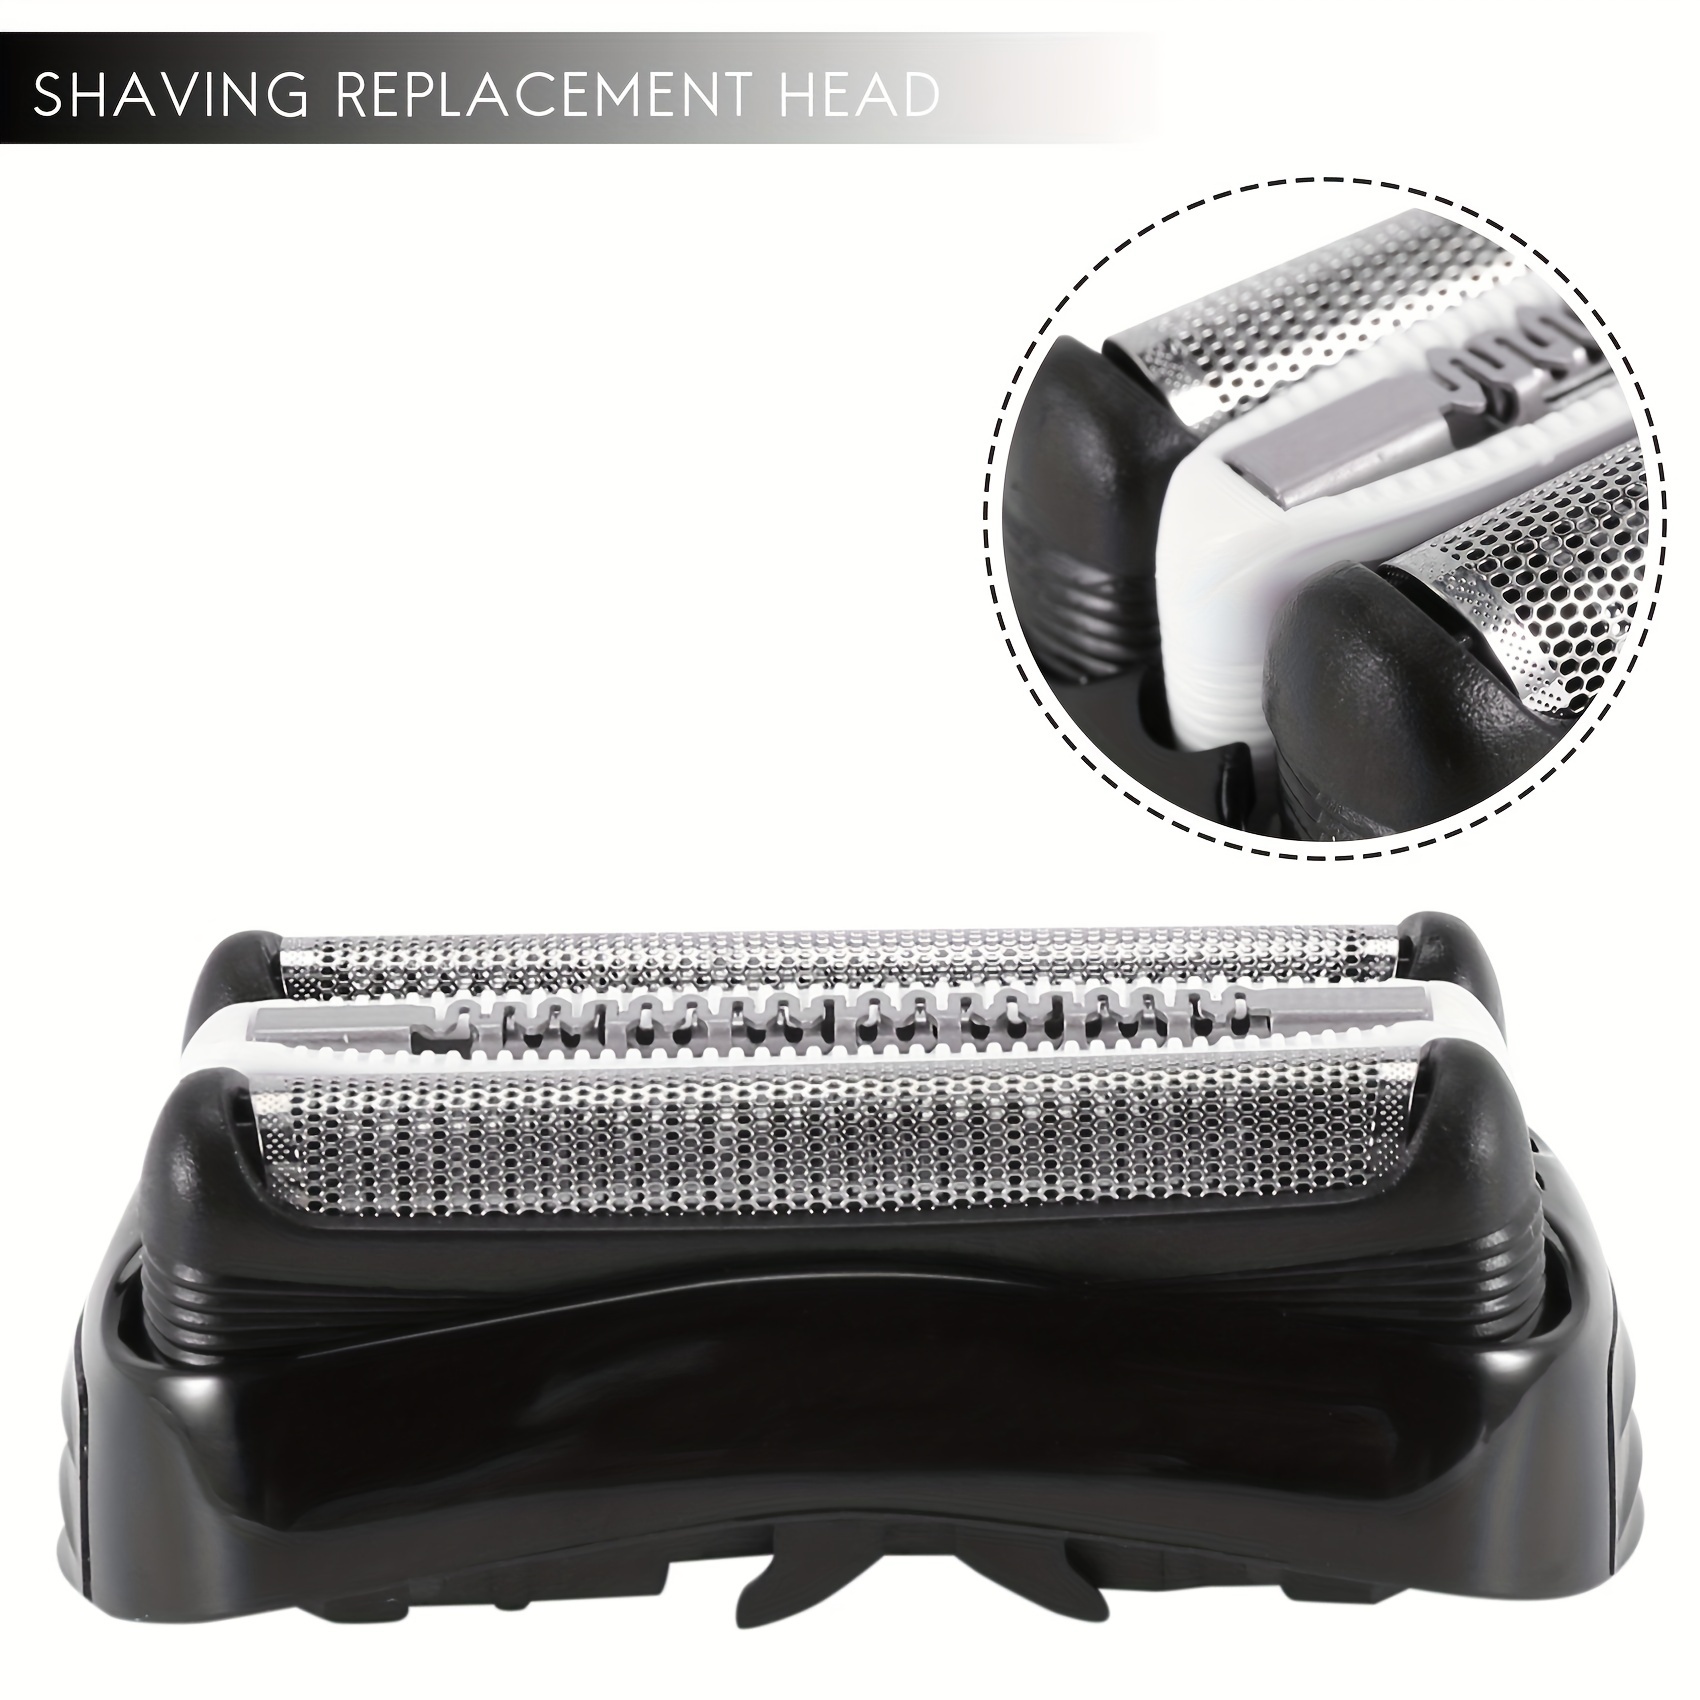 32B S3 Electric Replacement Shaver Head Accessories for Braun Series3  Shaving Razor Head, Suitable for Braun S3 3040s 3000s 3050cc 3010s 3070cc  3080s